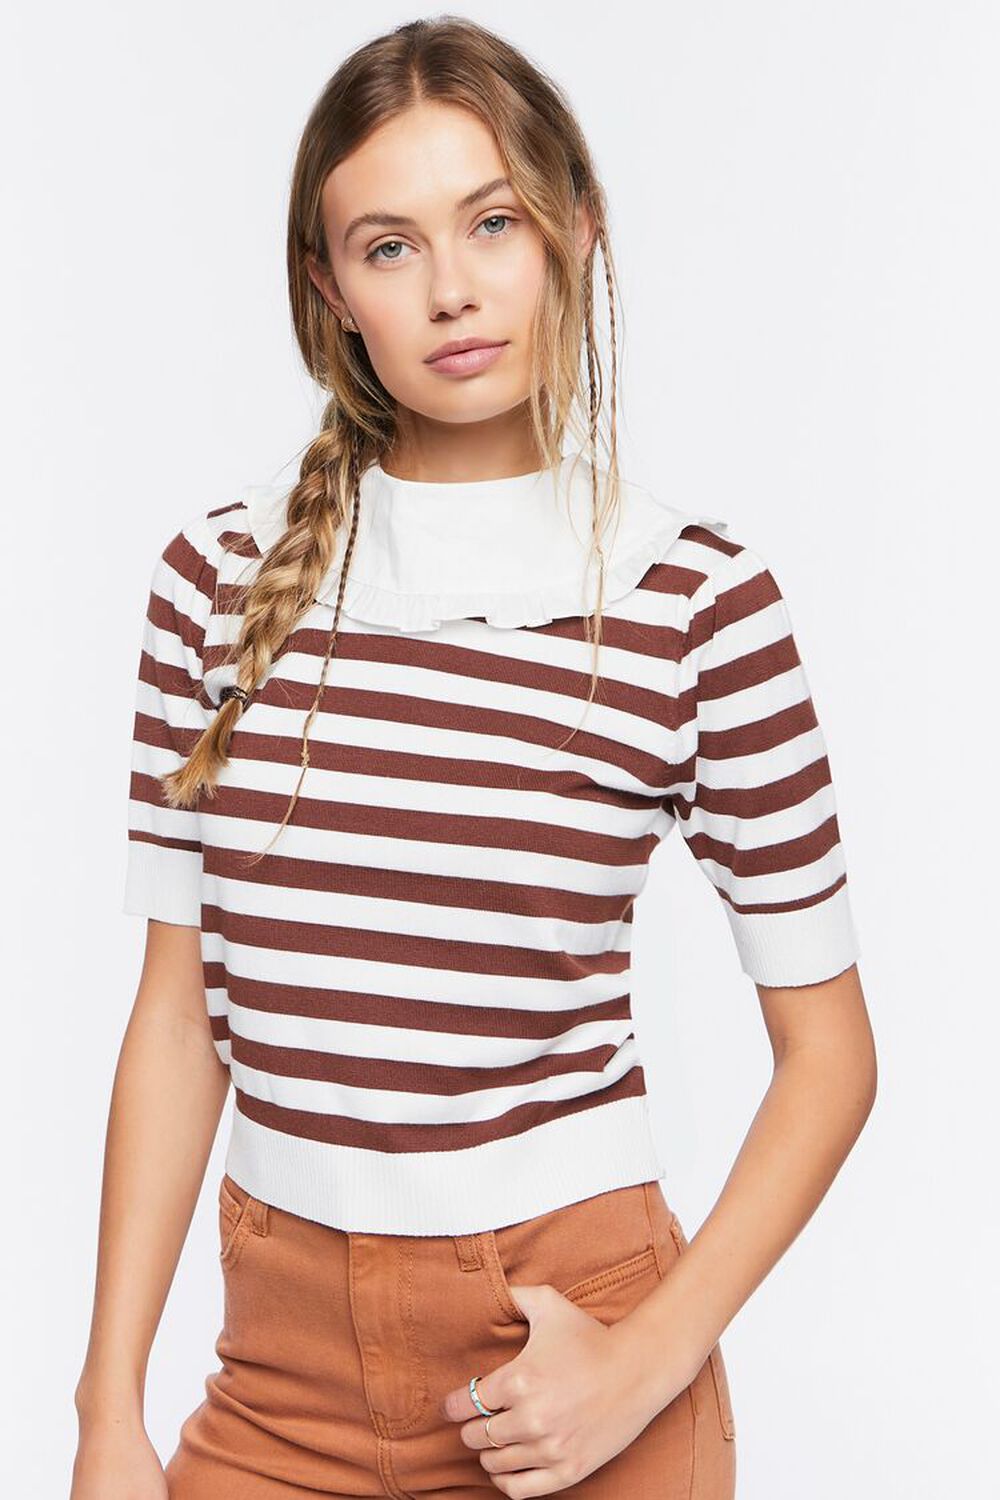 BROWN/WHITE Striped Collared Sweater-Knit Top, image 1